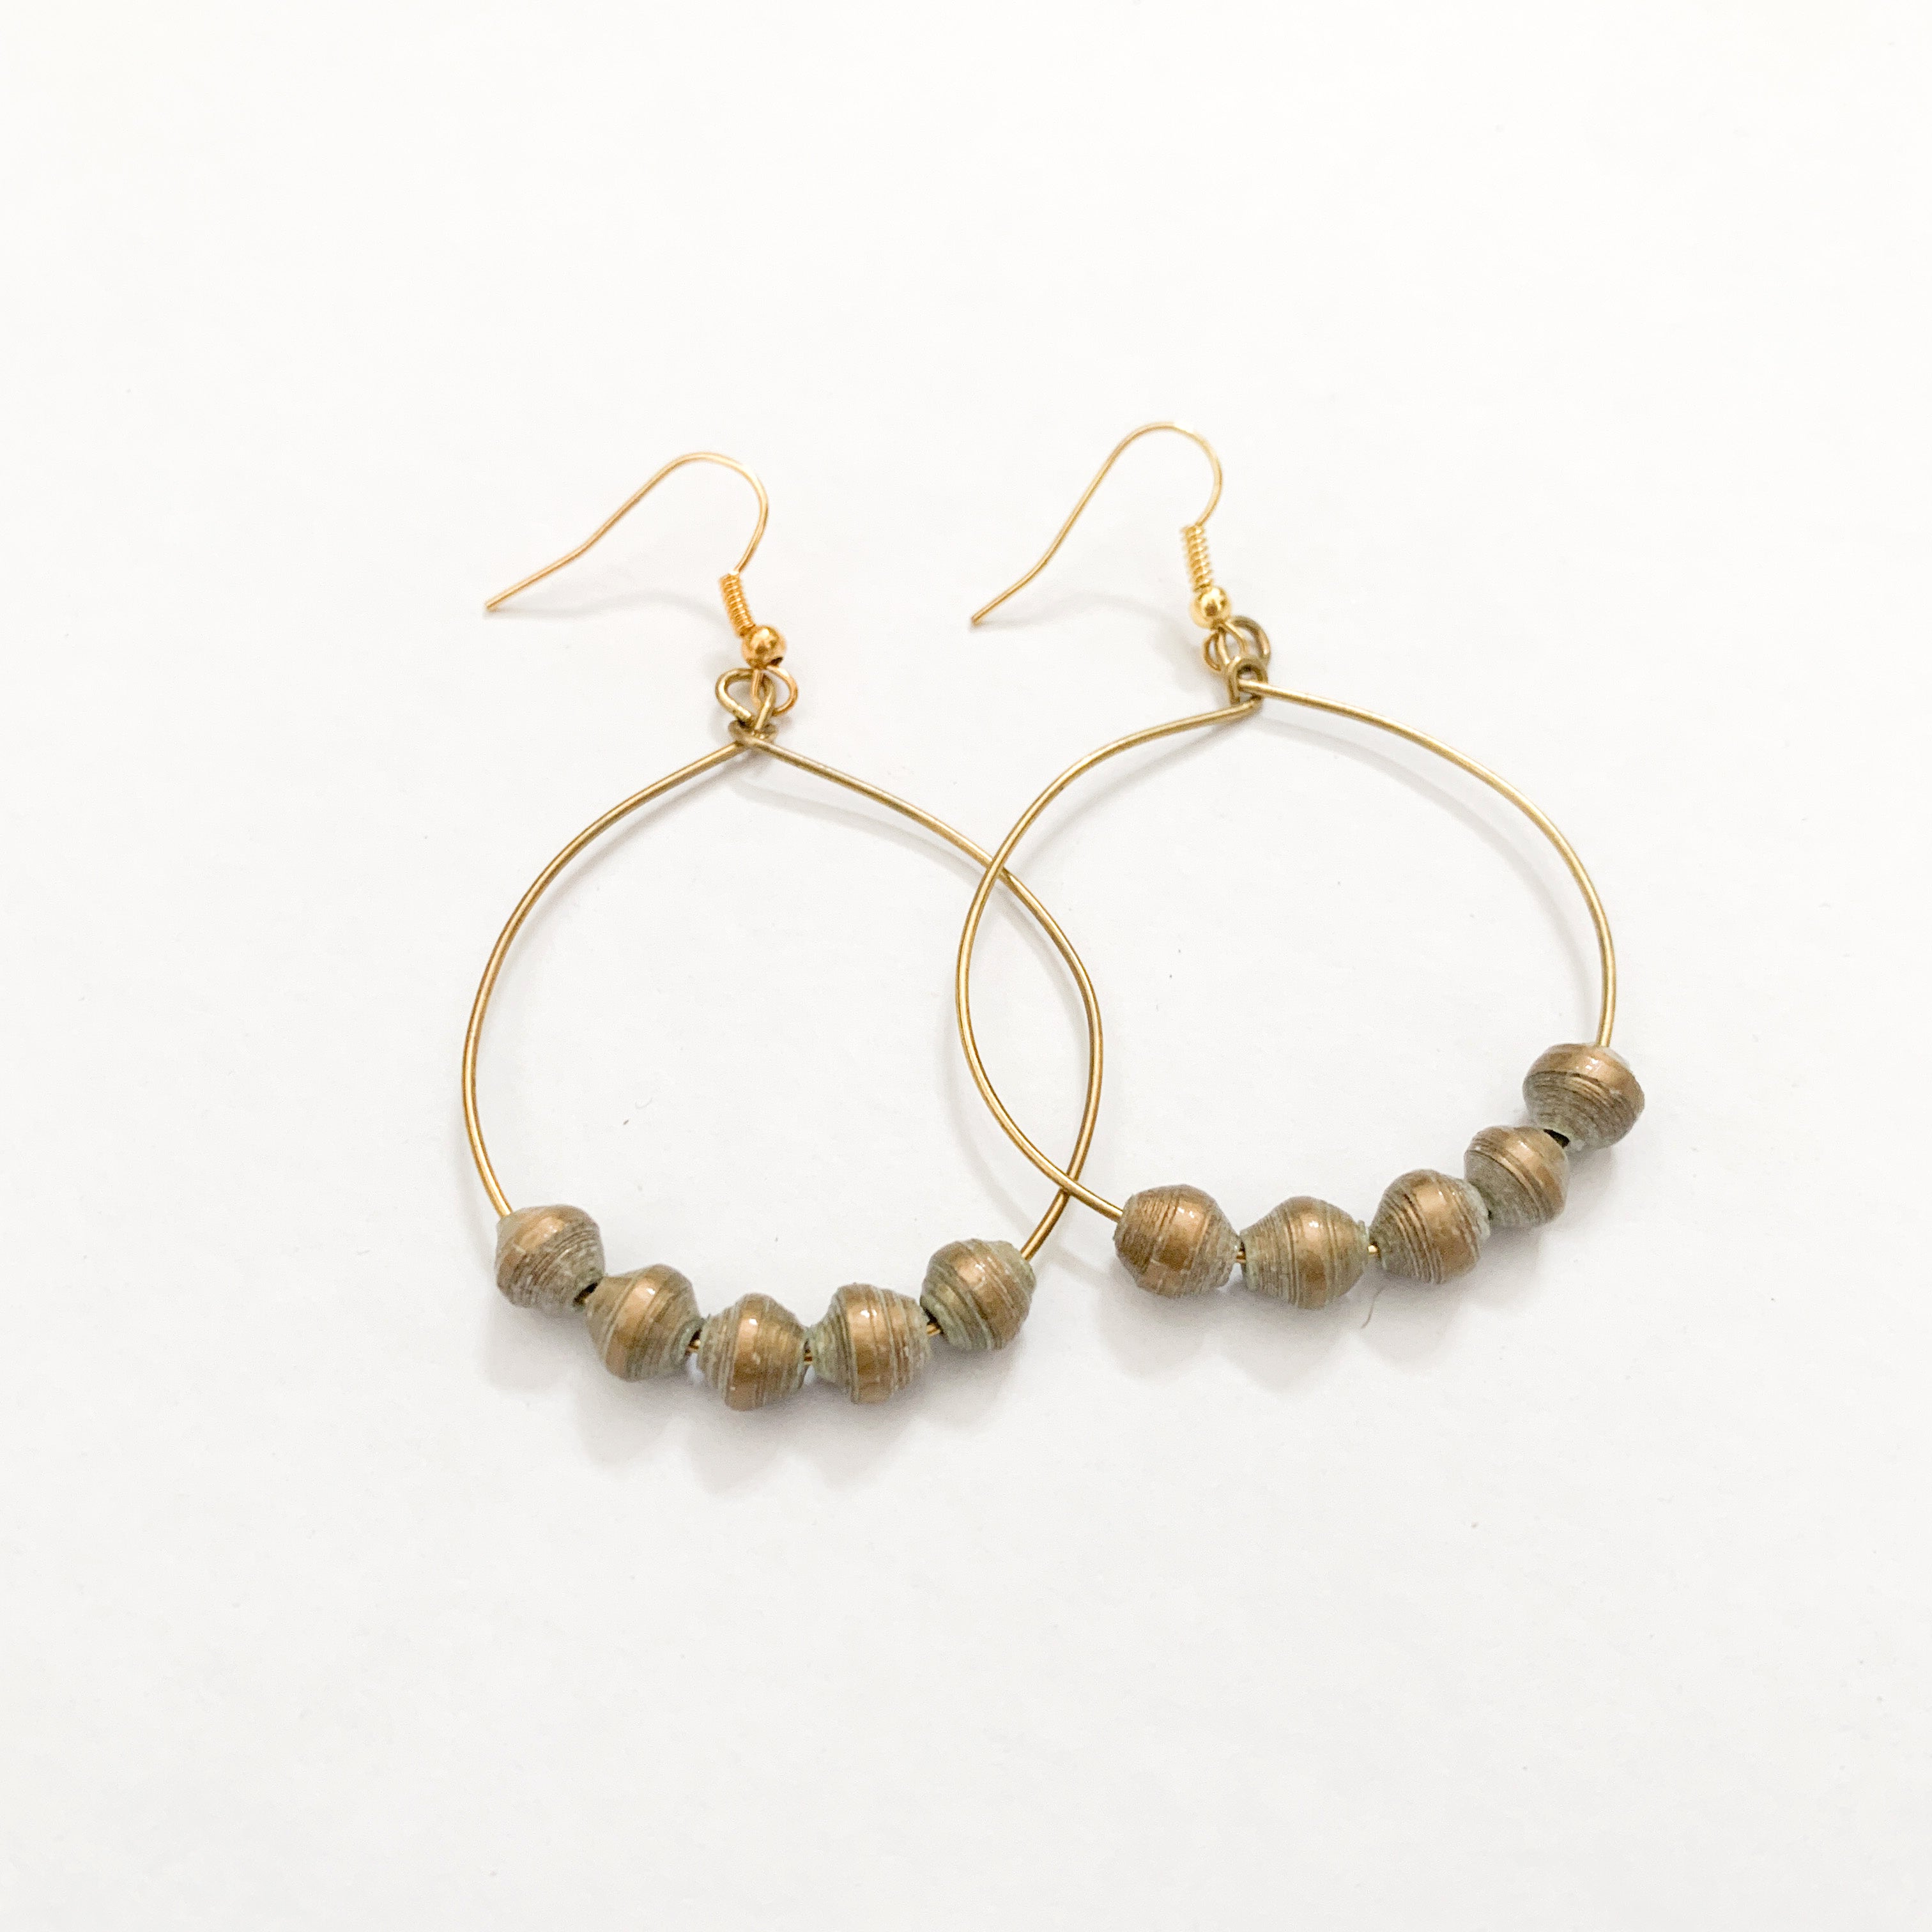 JustOne's brass hoop earrings with five gold paper beads on the bottom of the hoop, handcrafted in Uganda